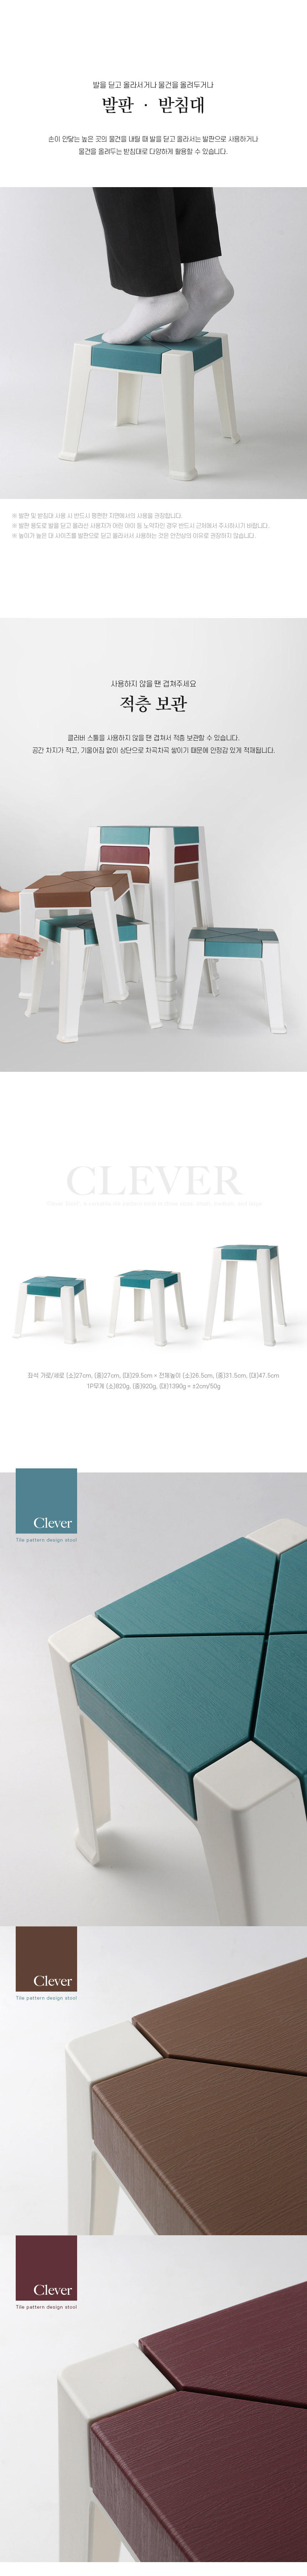 230721_tile_Clever_chair_03.jpg